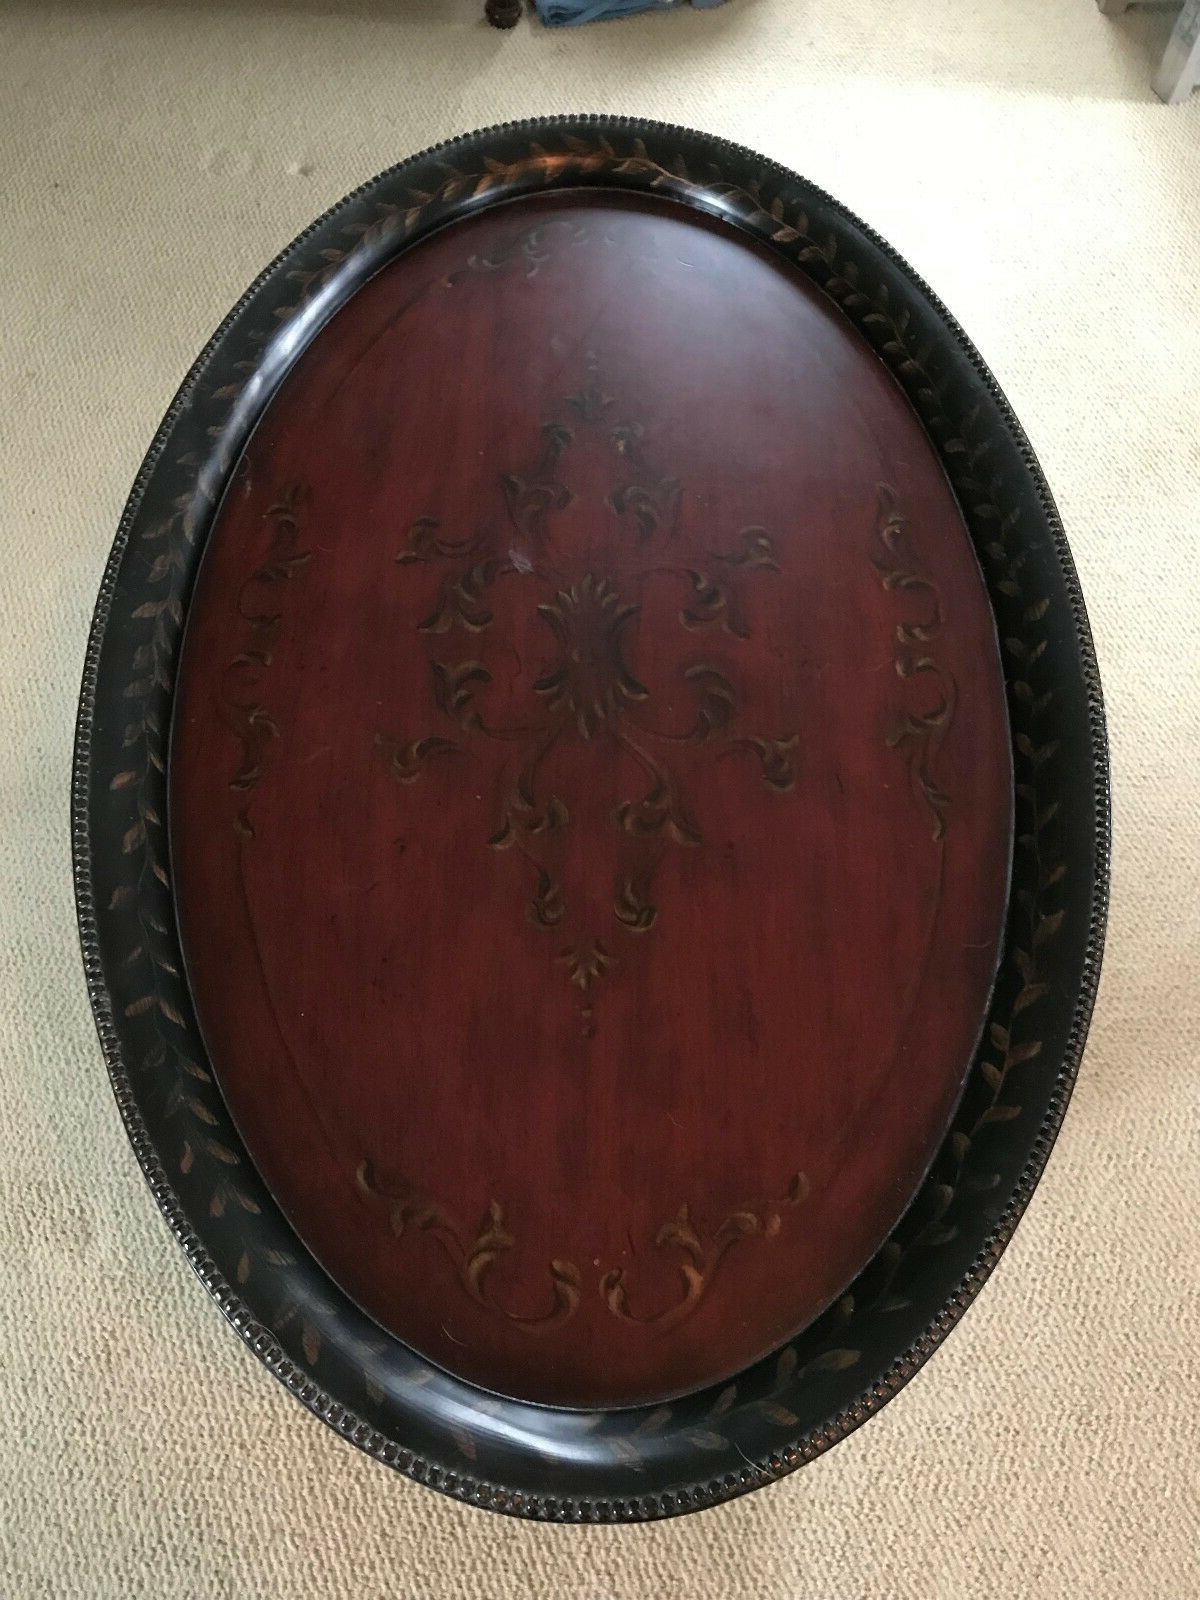 Wattisham Sideboards Within 2019 Kadine Coffee Tableastoria Grand  Traditional Red & Black Oval Tray  Style (View 8 of 20)